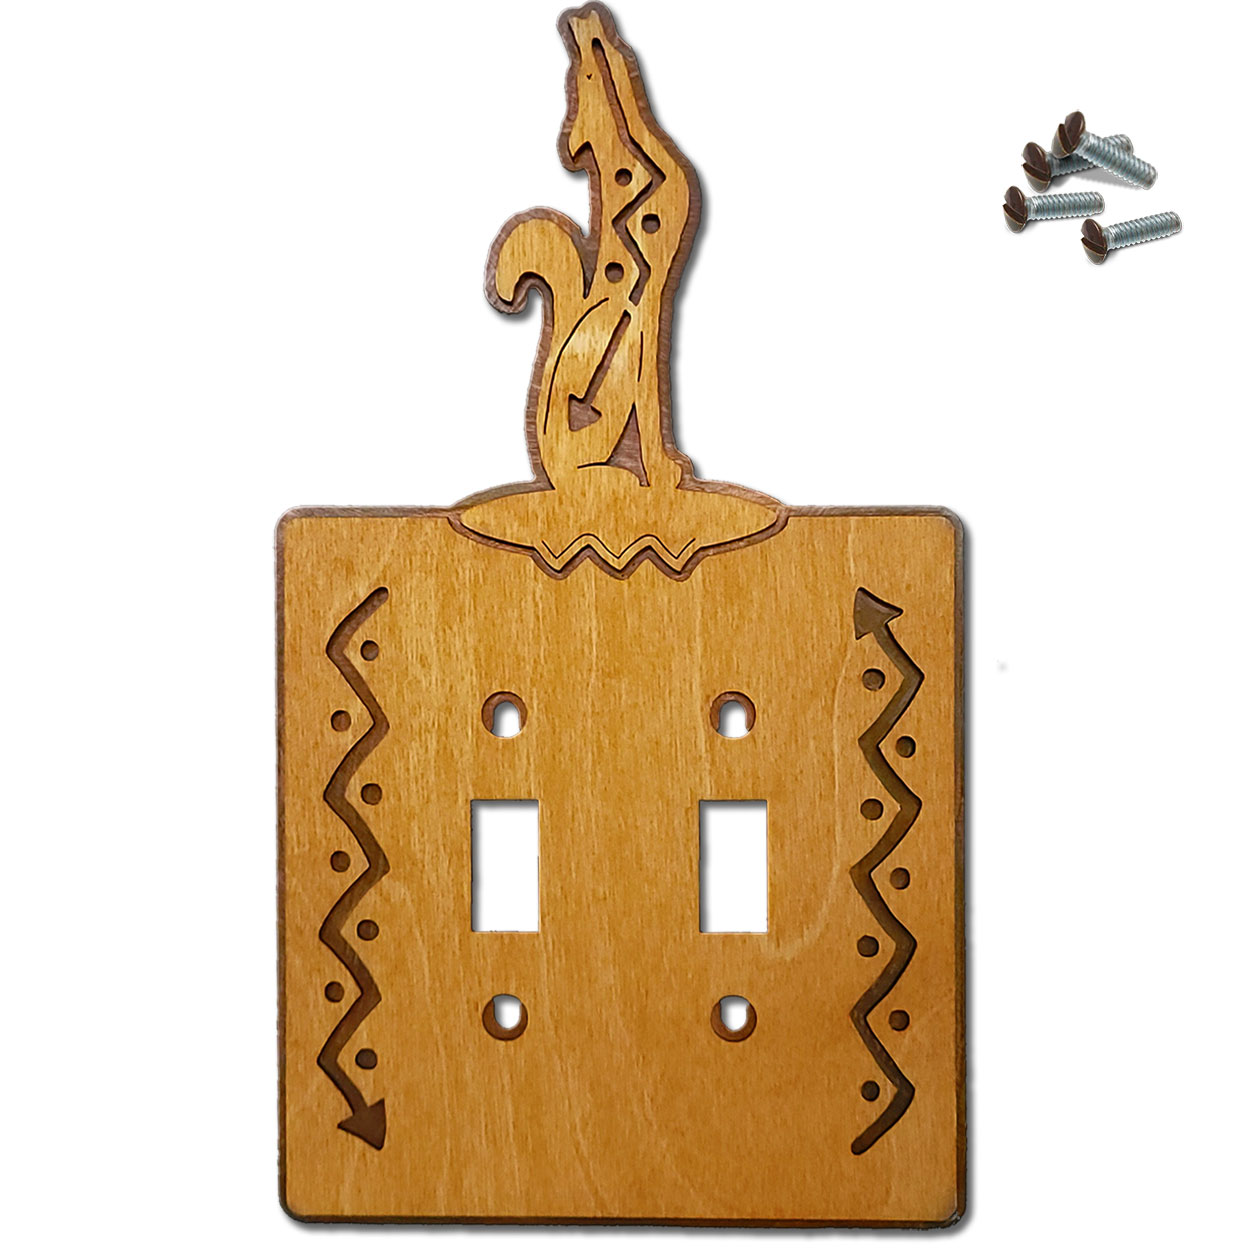 167222S -  Southwest Coyote Southwestern Decor Double Standard Switch Plate in Golden Sienna